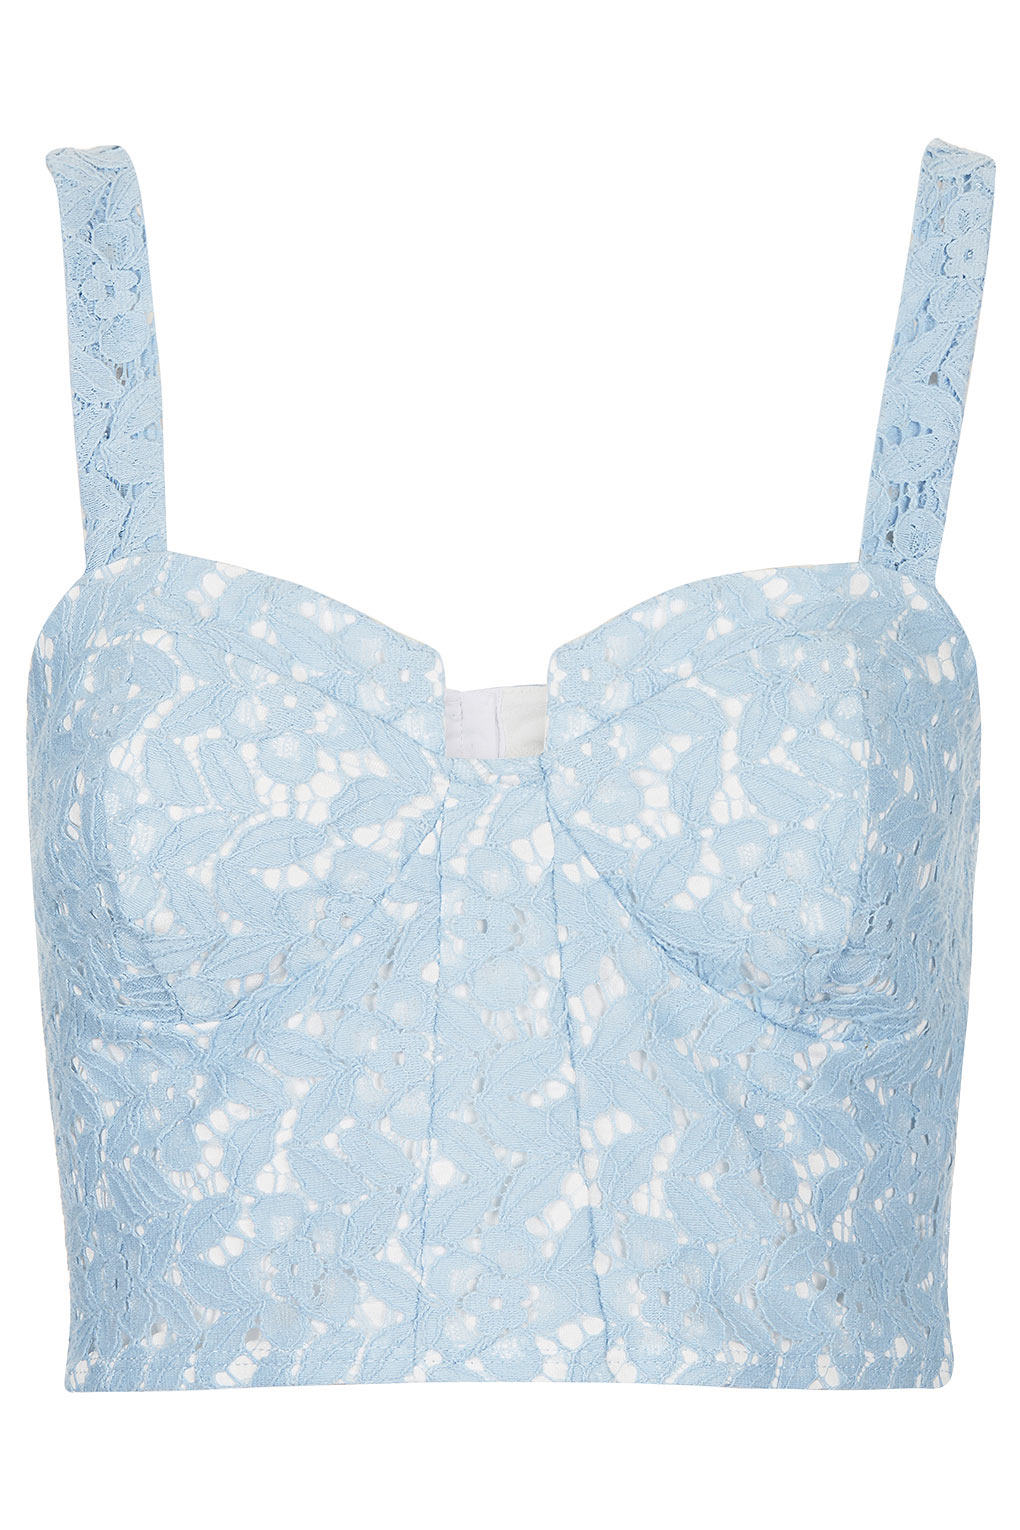 Lyst - Topshop Lace Corset Bralet Top in Blue